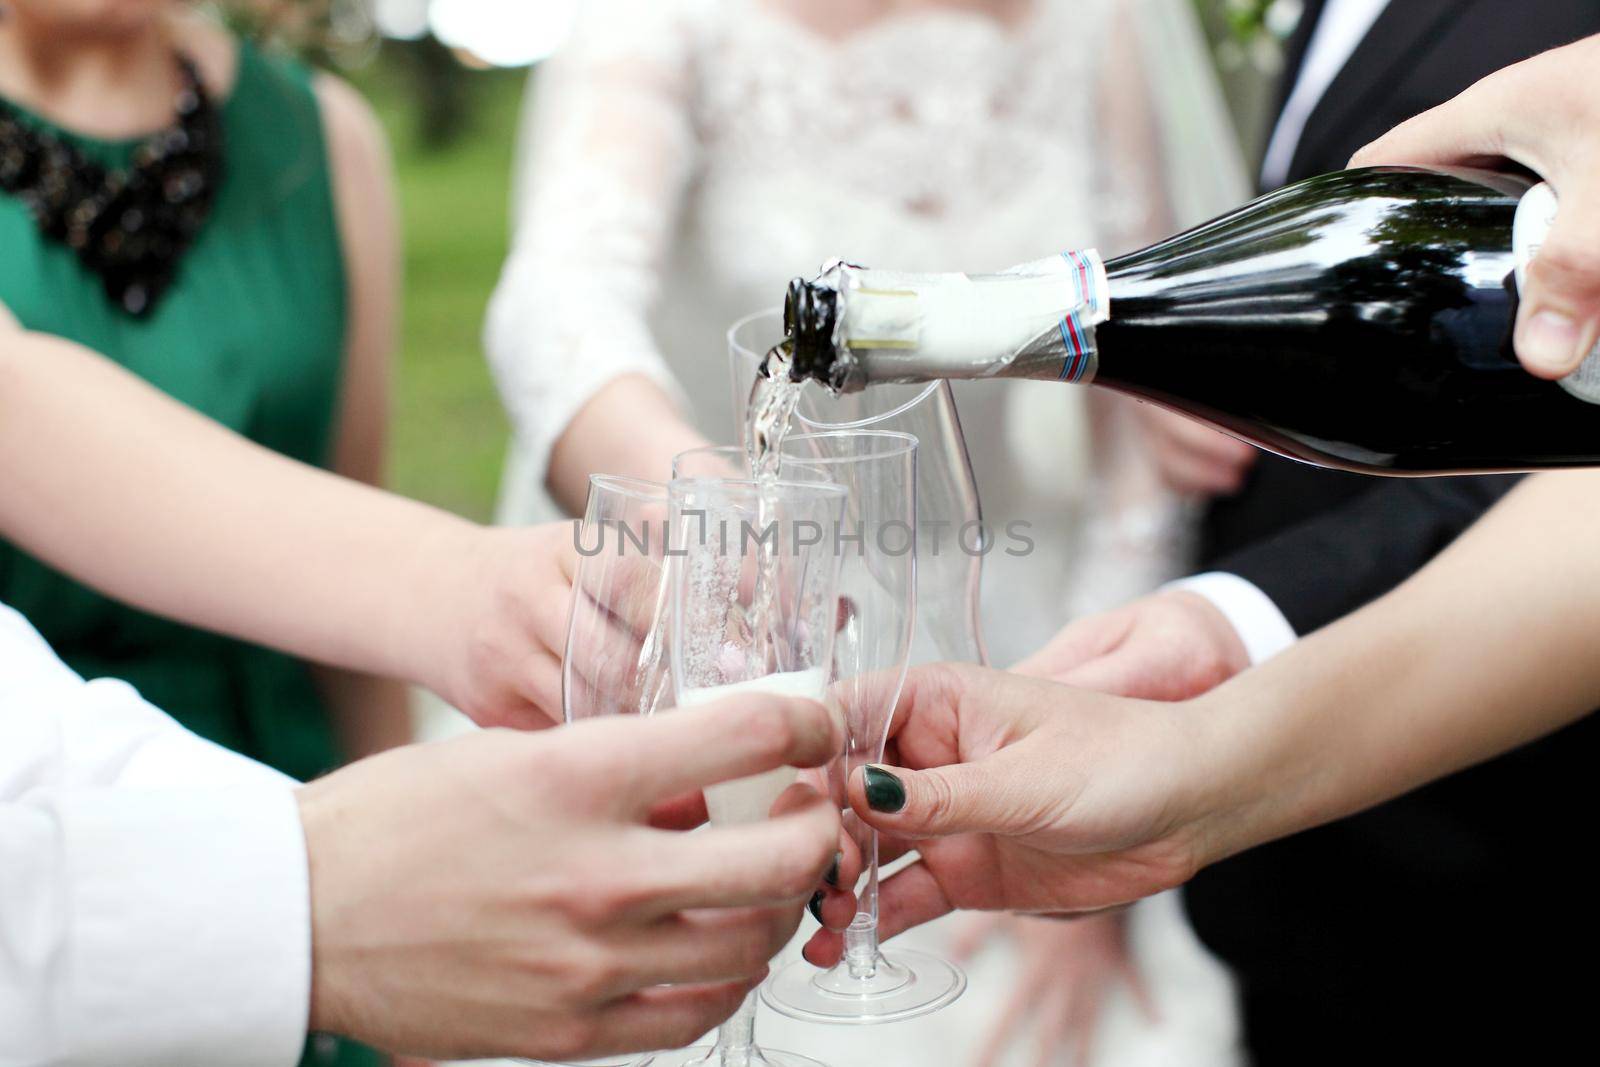 Celebration. Hands holding the glasses of champagne and wine making a toast. The party, wedding, celebration, alcohol, lifestyle, friendship, holiday, christmas, new, year and clinking concept.